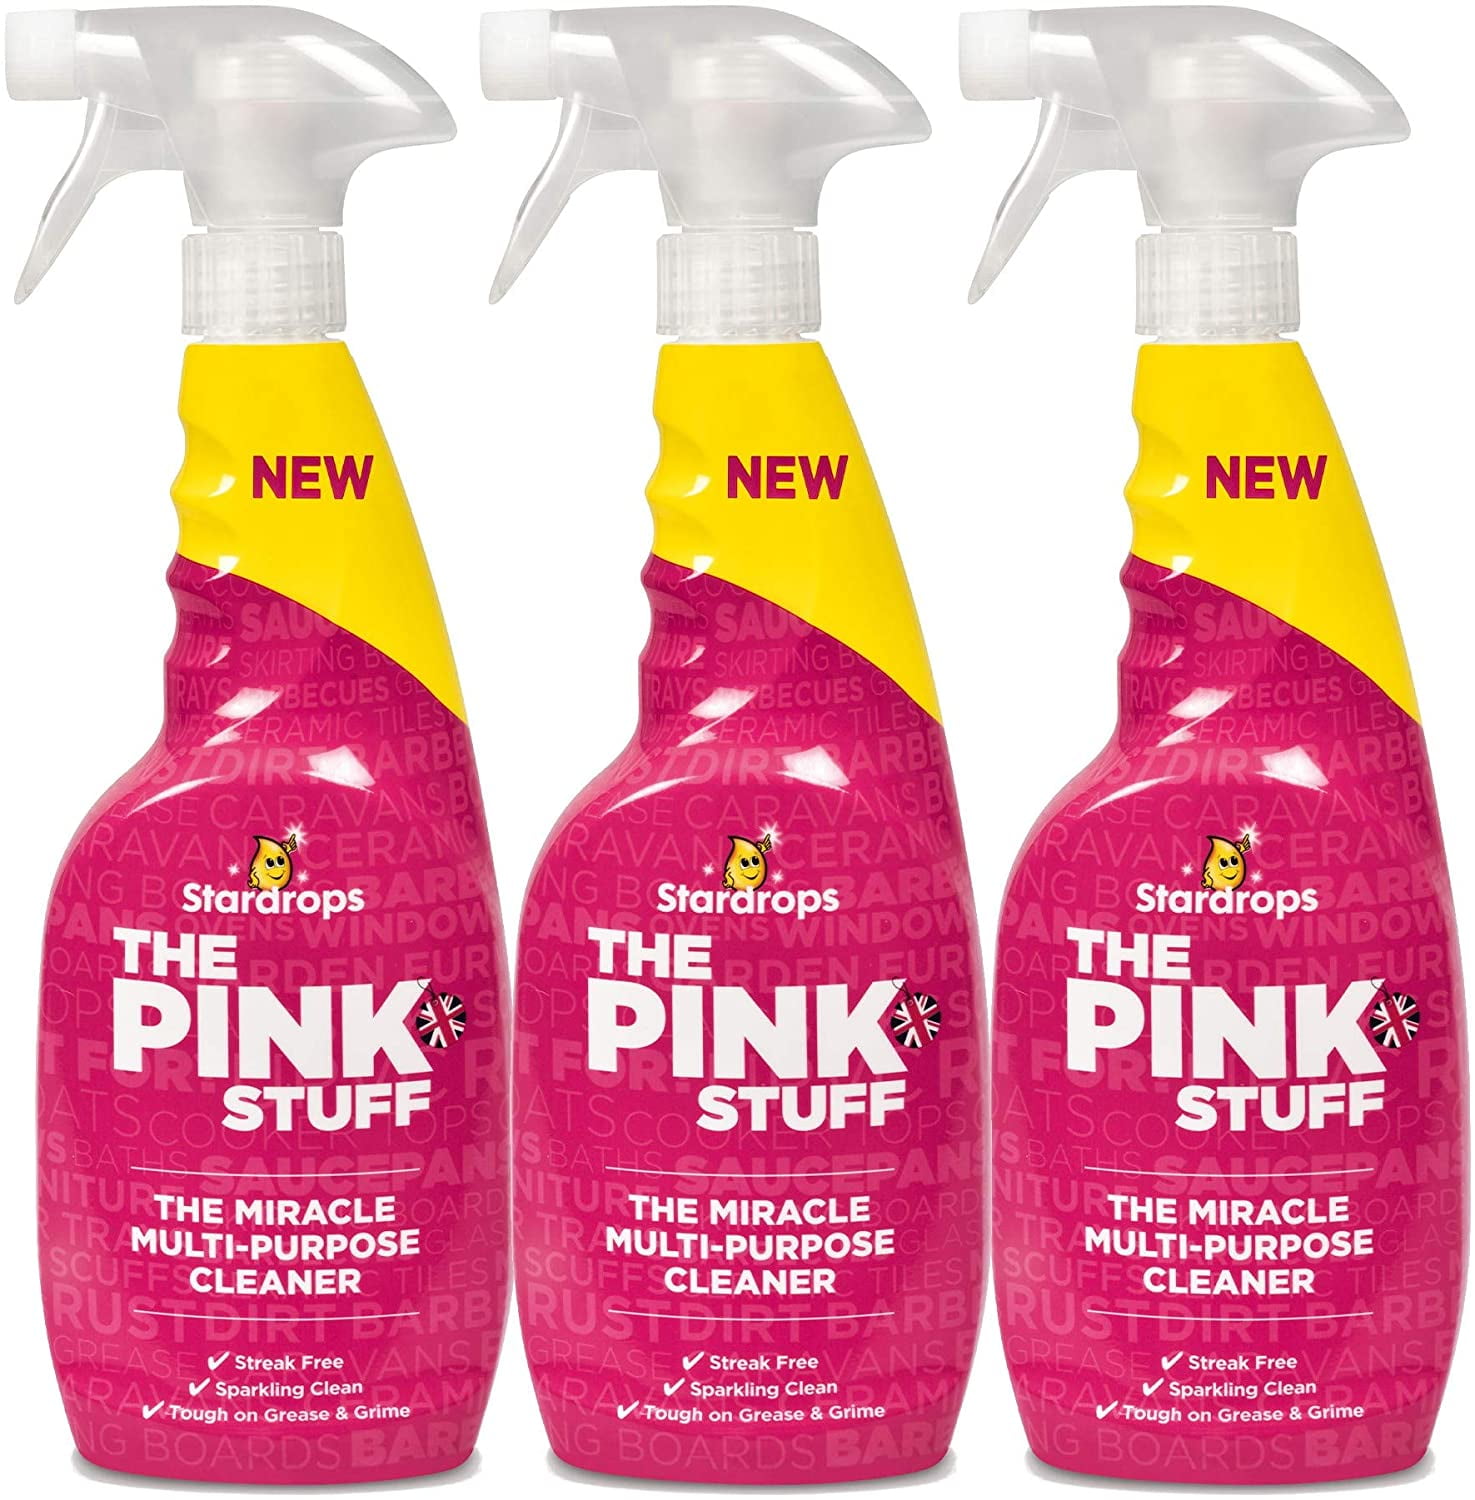 Stardrops The Pink Stuff Miracle Toilet Cleaner 750ml 2 Pack